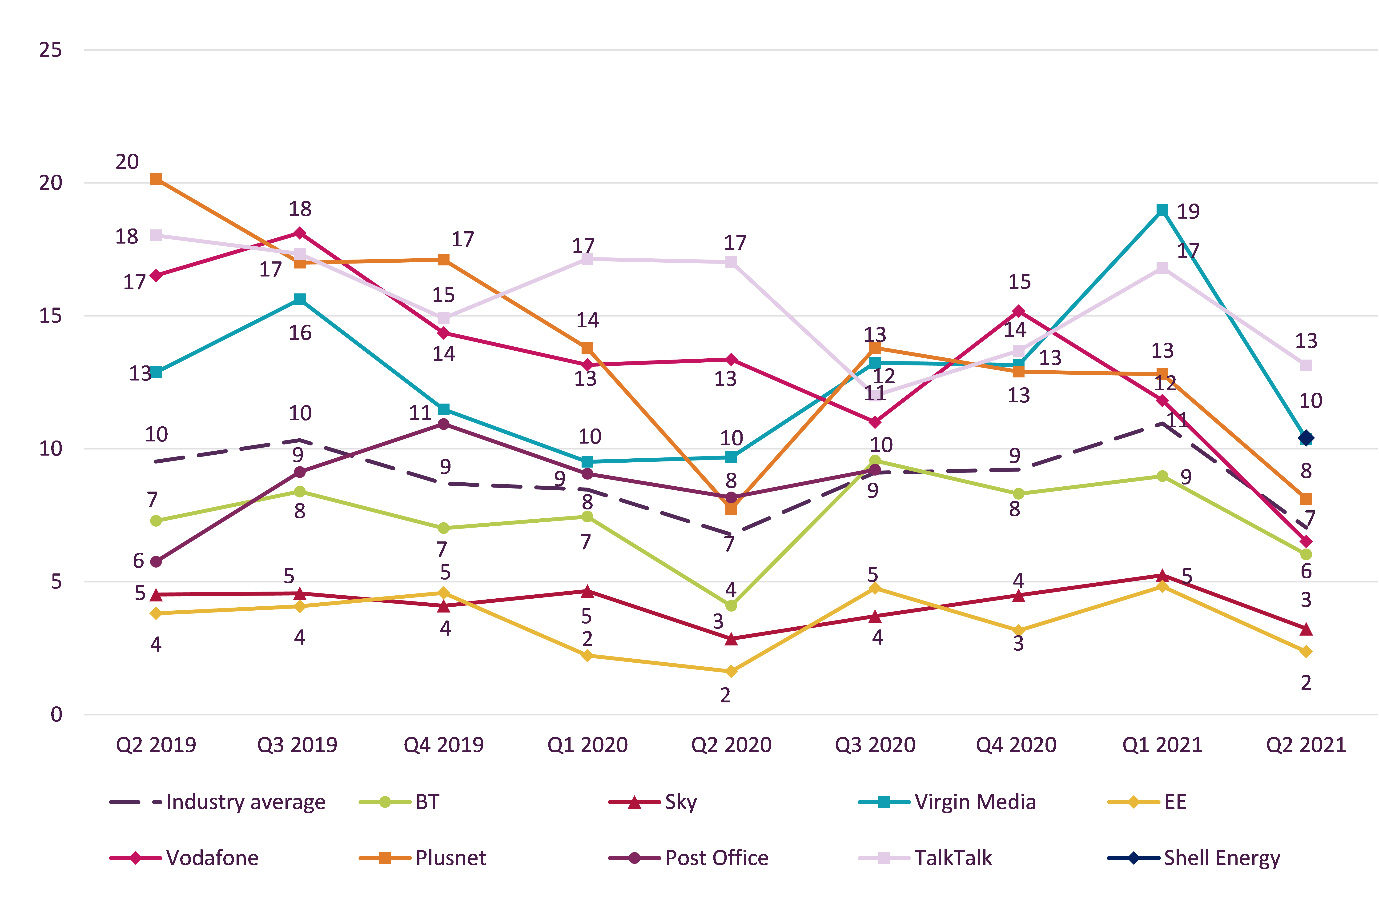 Graph showing trend data on residential consumer complaints received by Ofcom across landline by communications provider.   It shows the landline complaints per 100,000 subscribers for the Q2 2019 – Q2 2021 period.   TalkTalk generated the highest volume of landline complaints (at 13) in Q2 2021 followed by Virgin Media and Shell Energy at 10.    EE and Sky generated the lowest volume of landline complaints at 2 and 3 respectively.